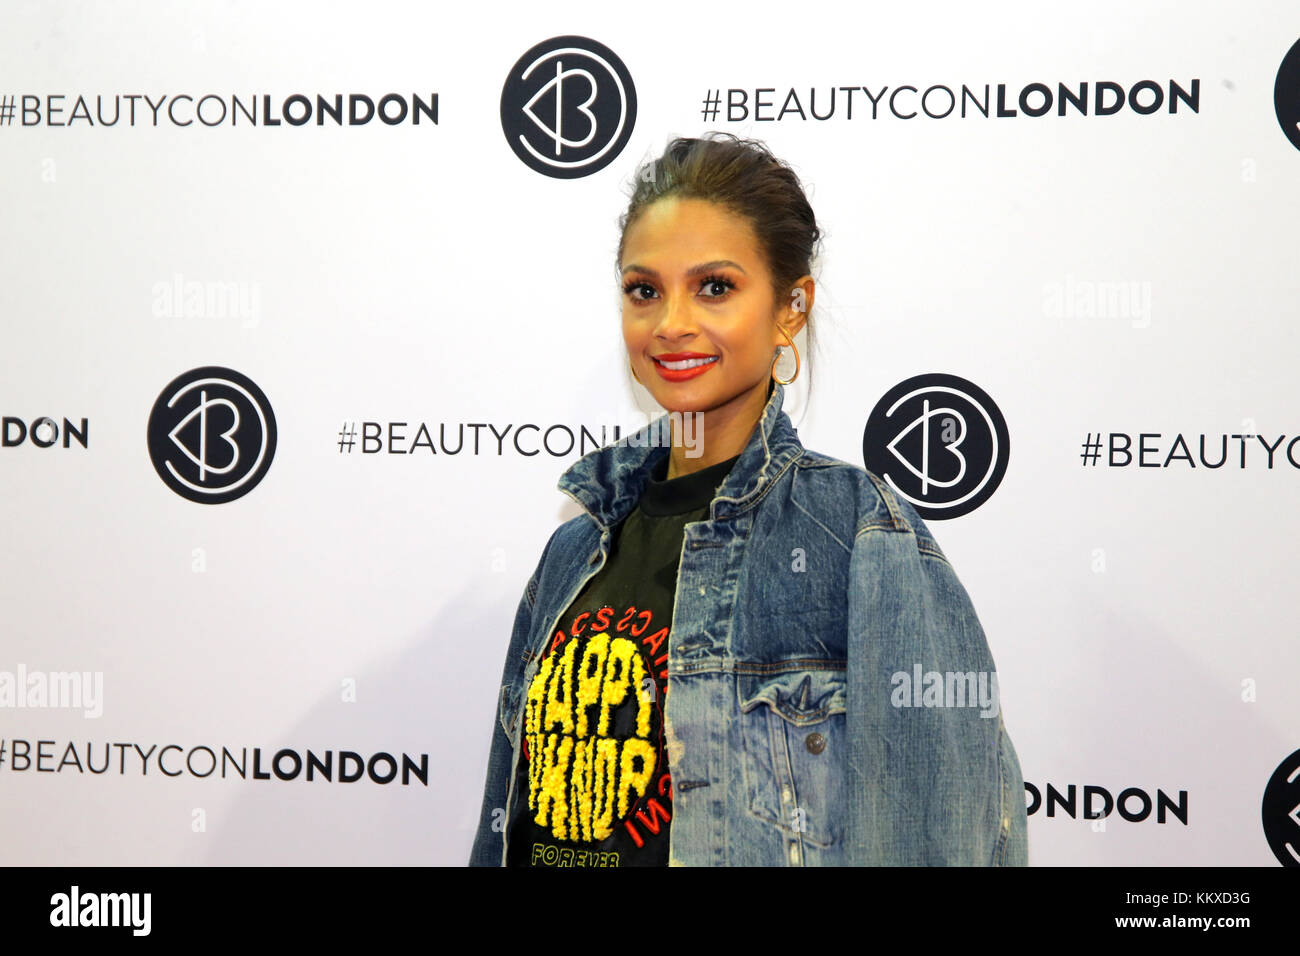 London, UK. 02nd Dec, 2017. Alesha Dixon singer, rapper, model, television presenter & talent show judge. She found fame in the all-female R&B/garage trio Mis-Teeq at Beautycon Festival that come to the London Olympia the show welcome some of the world's most influential content creators and celebrities, giving the chance to the thousands of attendees to meet and greet their idols who they follow on TV Instagram or YouTube Beautycon is a community for brands and fans to come together and talk about what matters; beauty, fashion, style Credit: Paul Quezada-Neiman/Alamy Live News Stock Photo